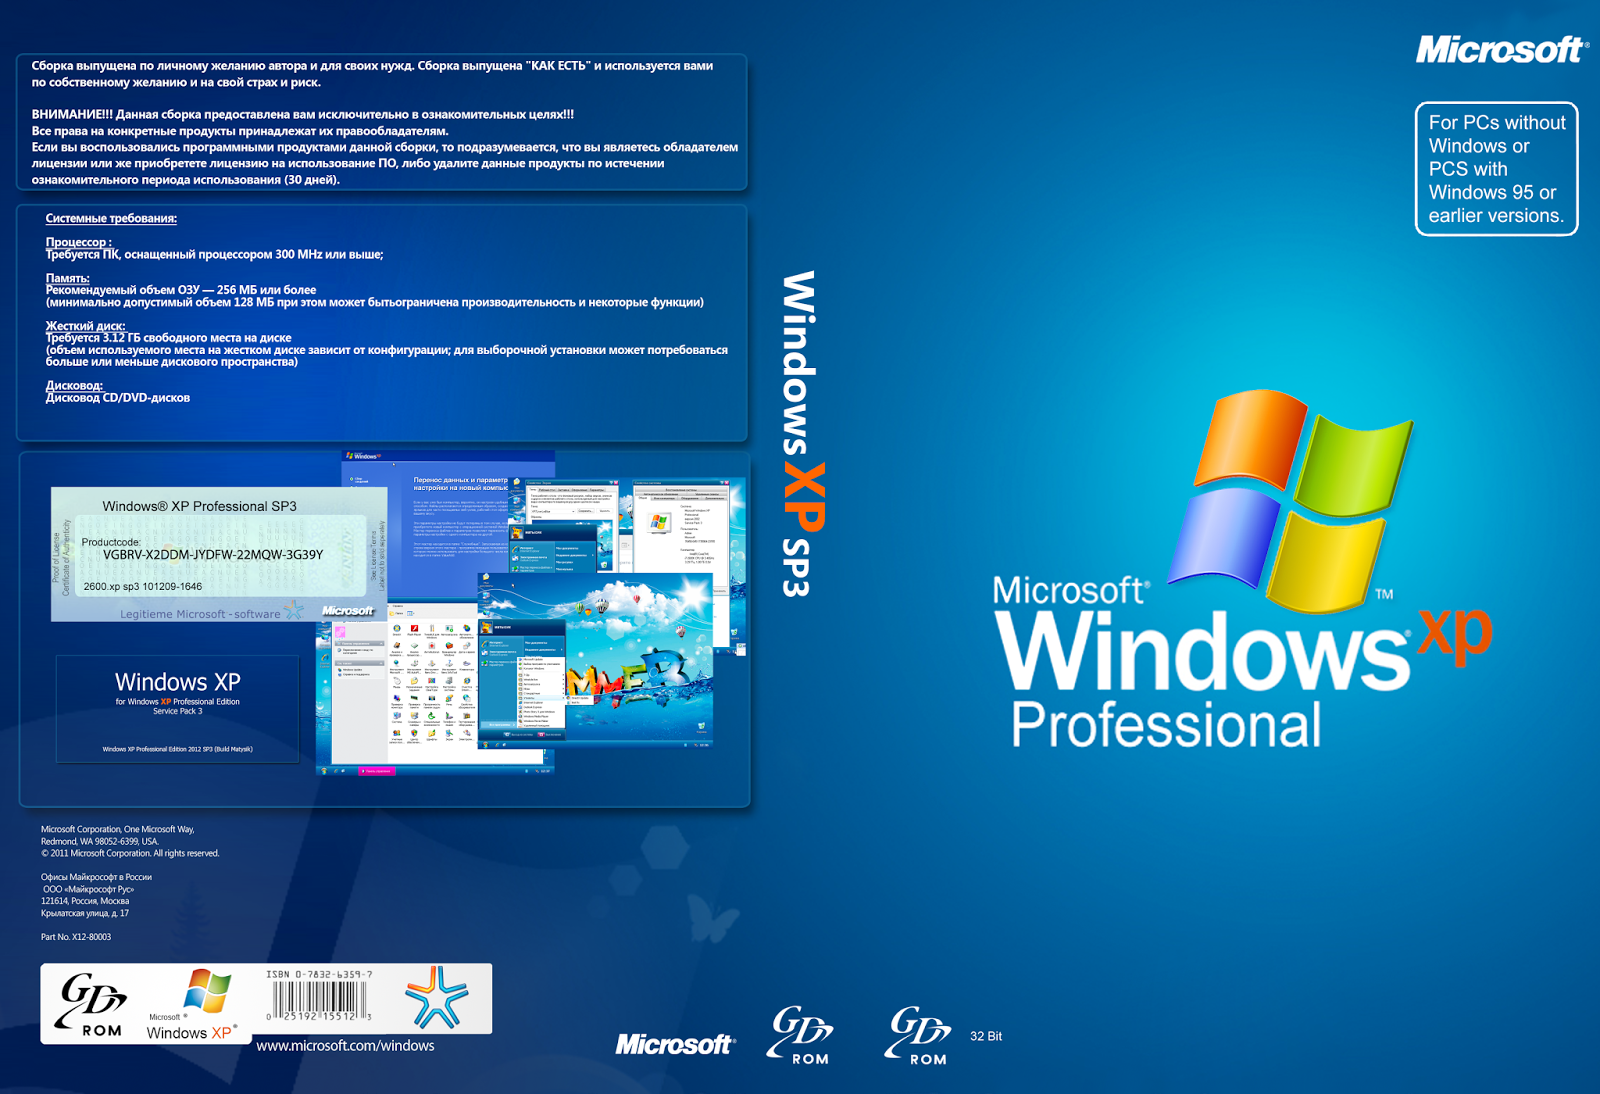 windows xp service pack 3 iso free download